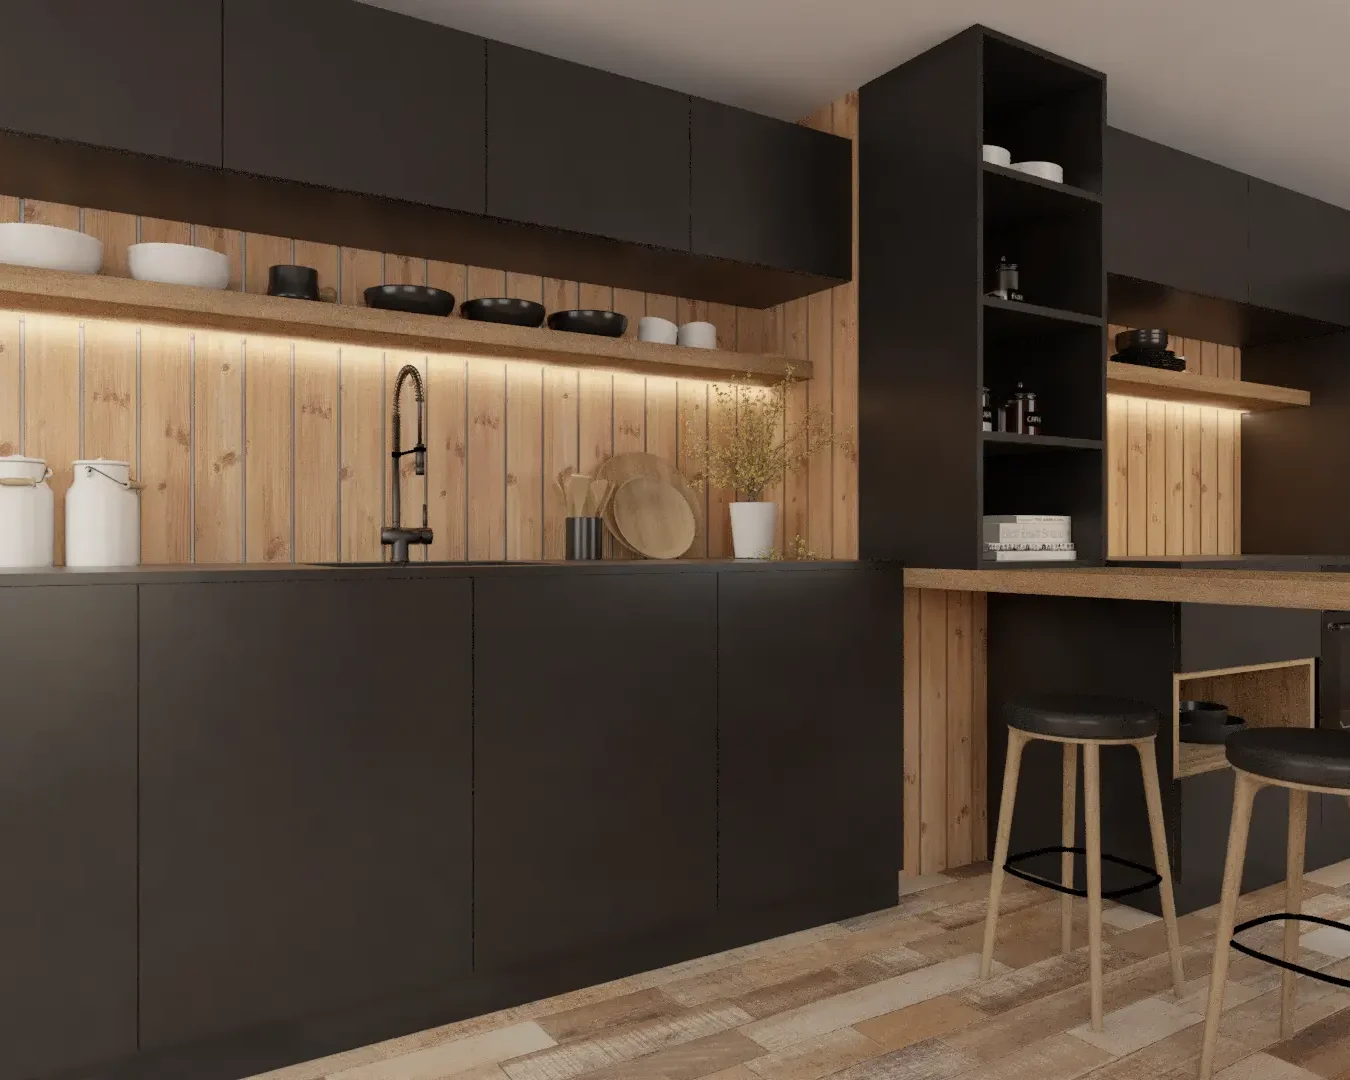 Modern kitchen featuring matte black cabinets contrasted with natural wood accents, designed for a sleek and sophisticated look. Design by Debora, based in New York.